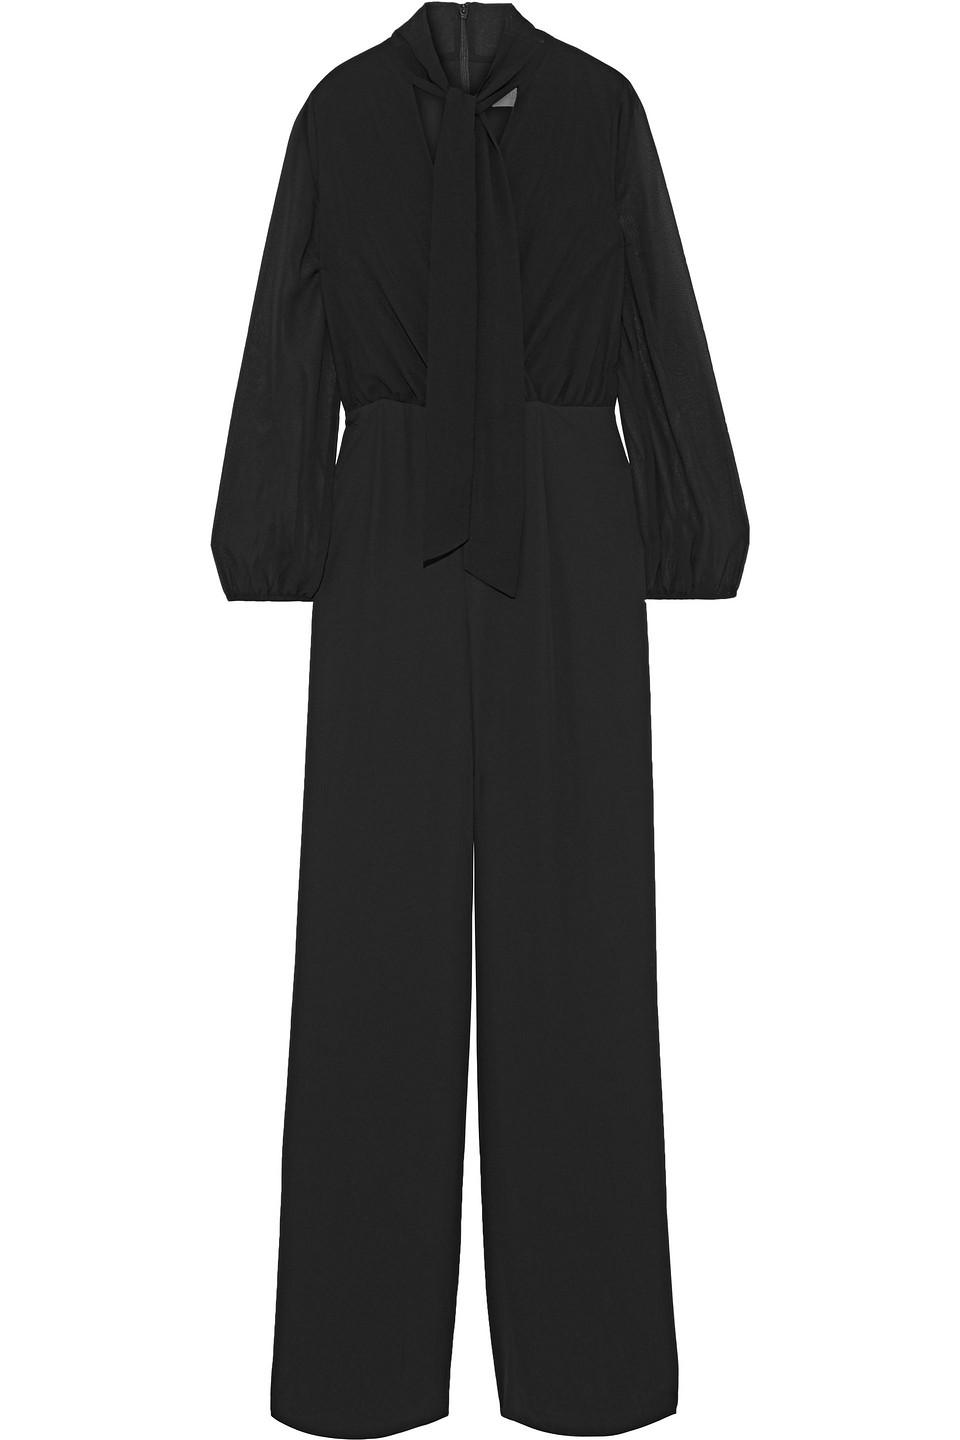 Mikael Aghal Tie-neck Chiffon-paneled Crepe Wide-leg Jumpsuit in Black -  Lyst